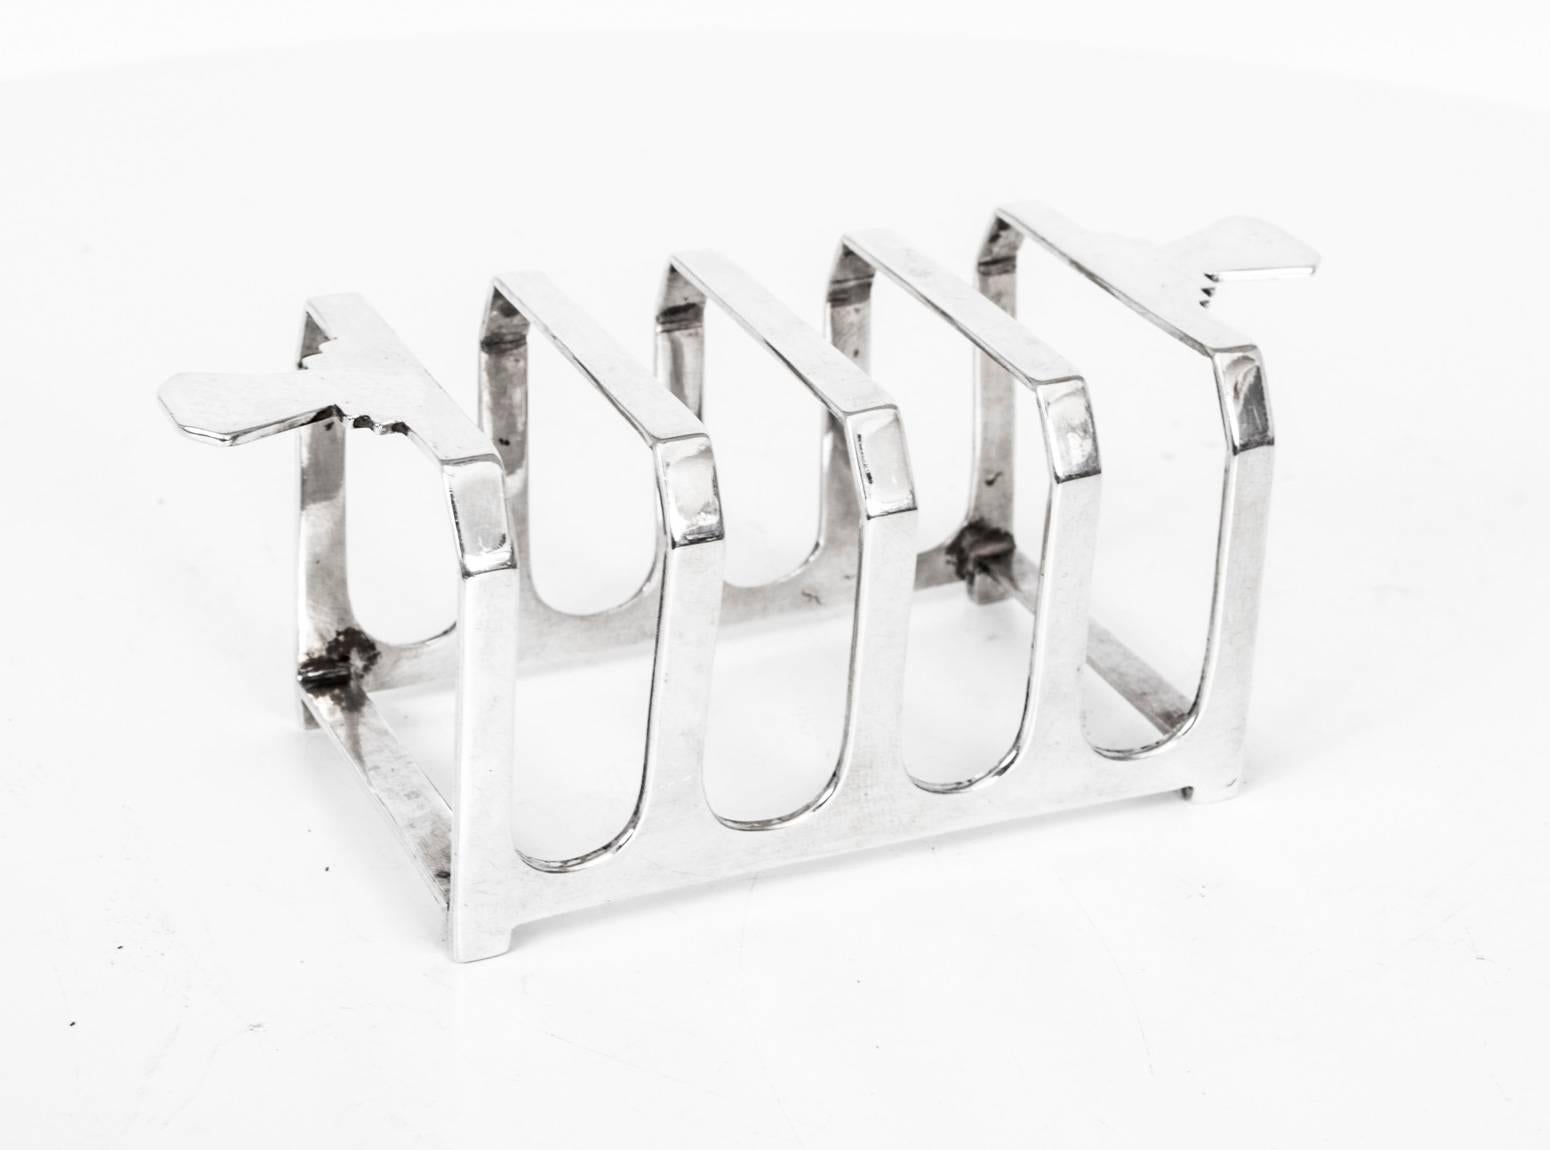 This is a lovely pair of antique Art Deco silver plated toast racks by the renowned retailer, designer and silversmith Mappin & Webb, circa 1930 in date.

They have elegant geometric lug handles and canted divisions.

The craftsmanship and